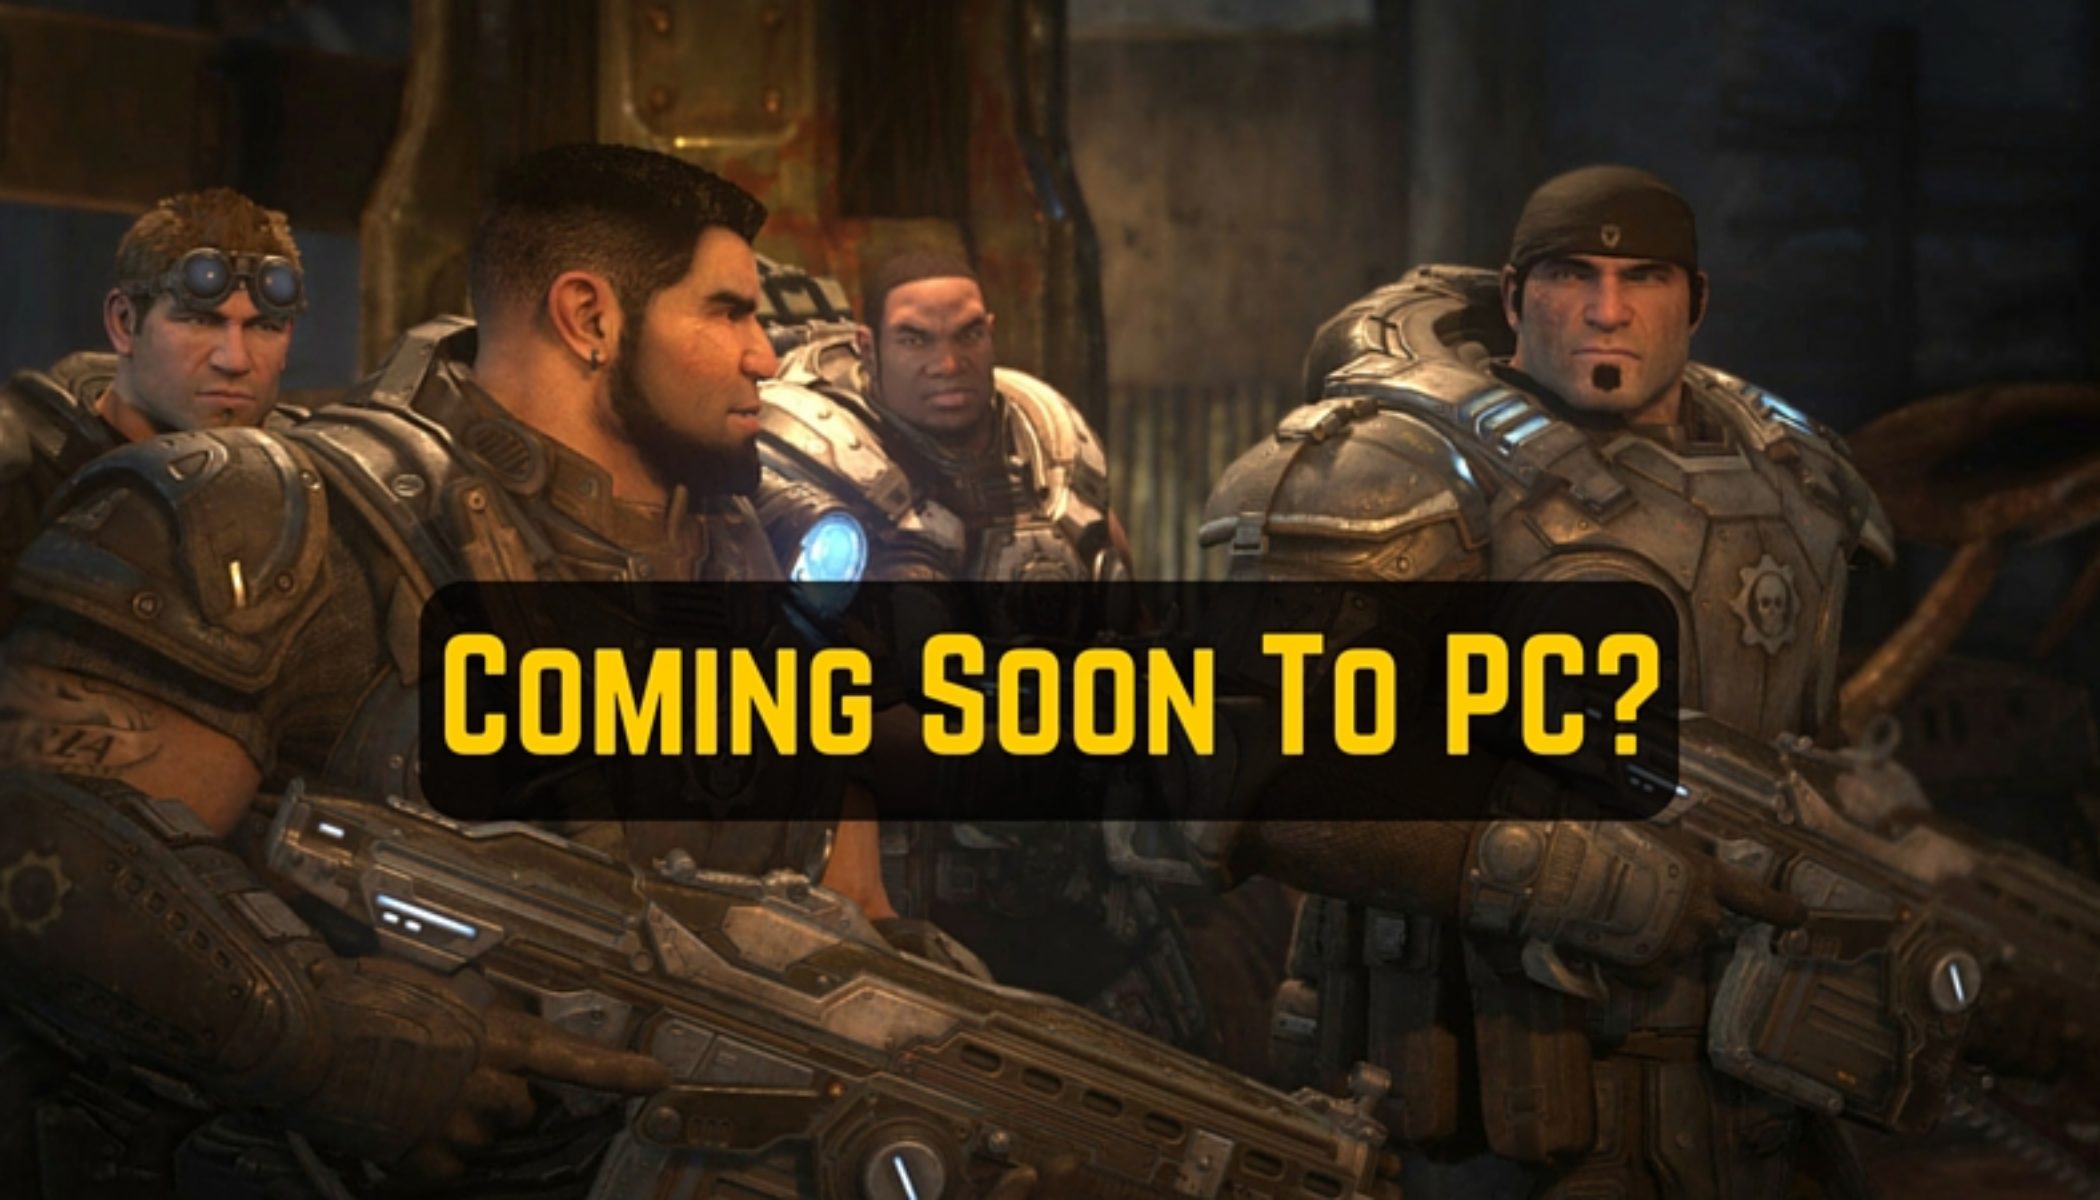 Gears of War 4 PC system requirements revealed along with 4K gameplay  trailer